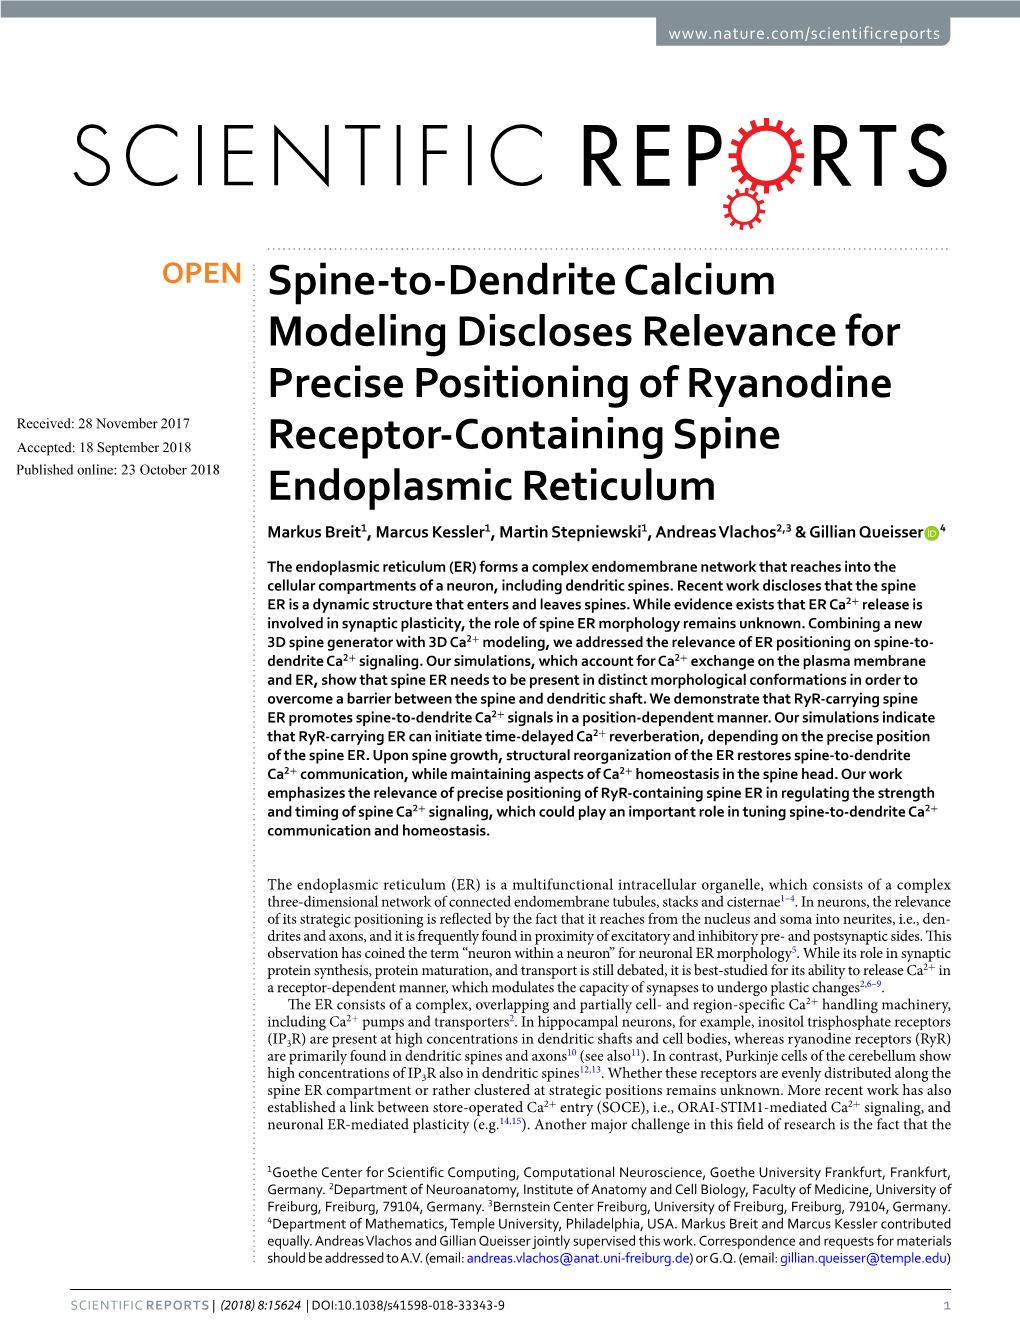 Spine-To-Dendrite Calcium Modeling Discloses Relevance for Precise